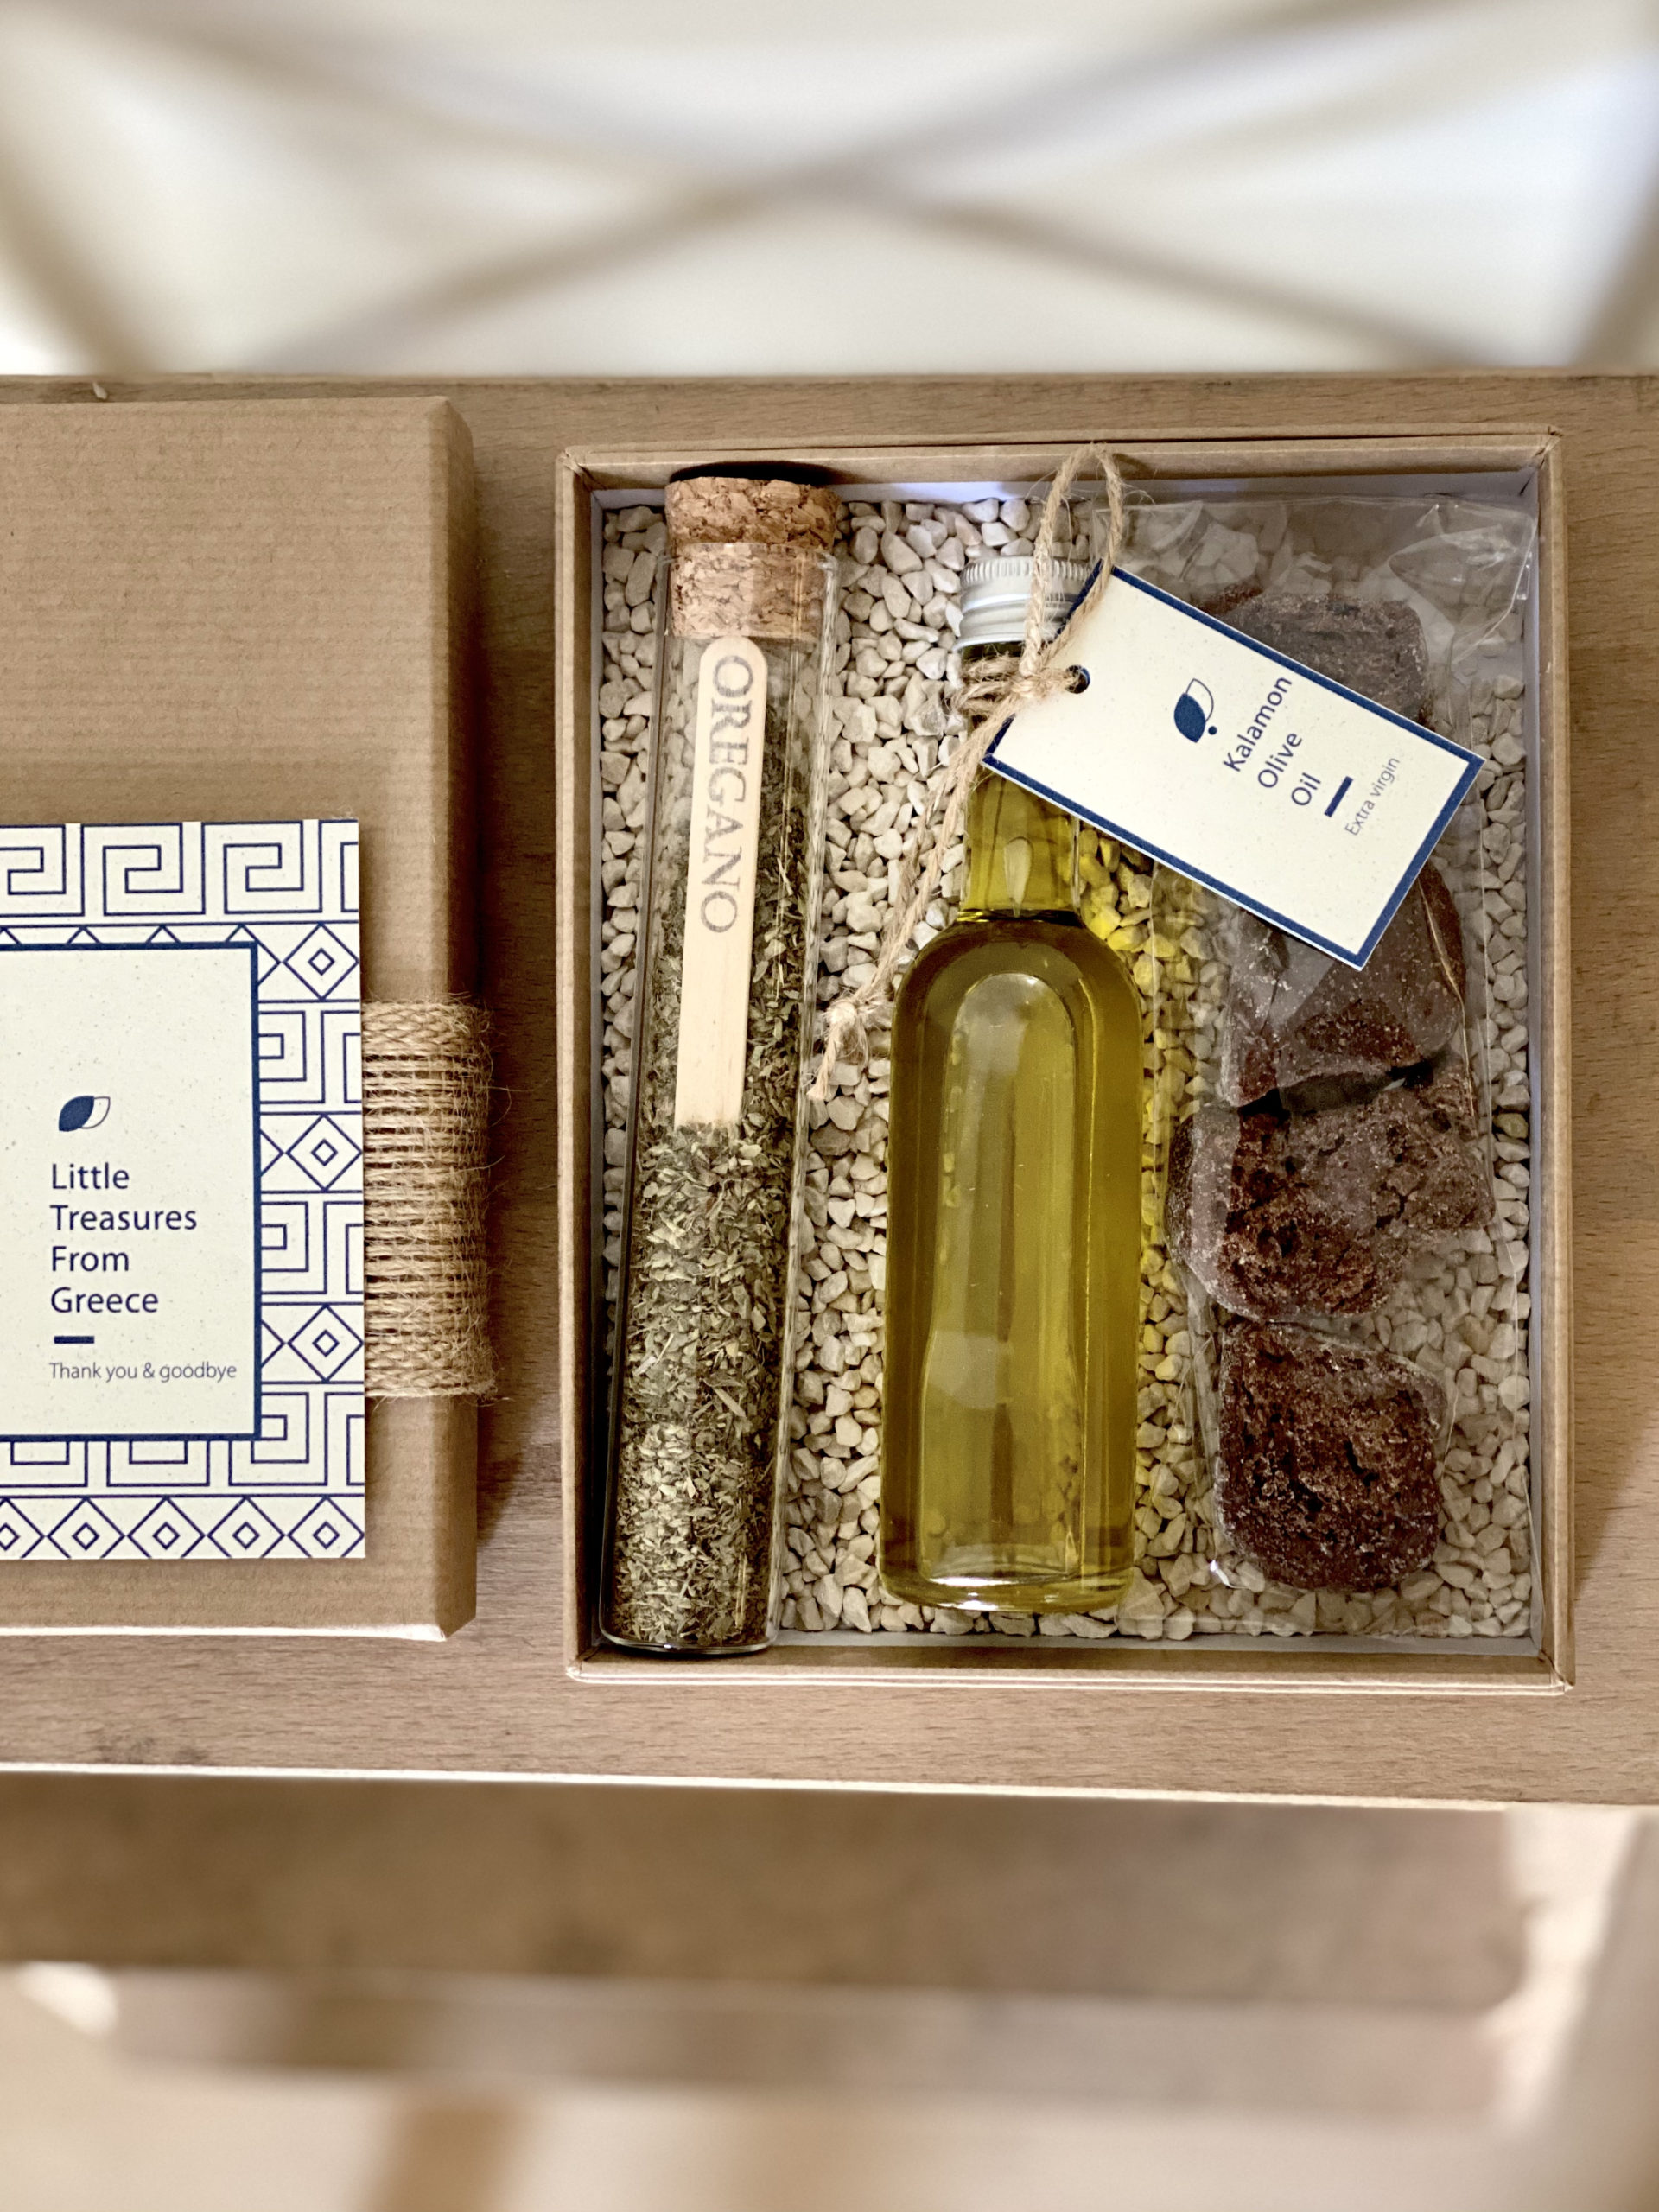 little-treasures-from-greece-wedding-welcome-gift-box-oil-oregano-rusks-packaging-